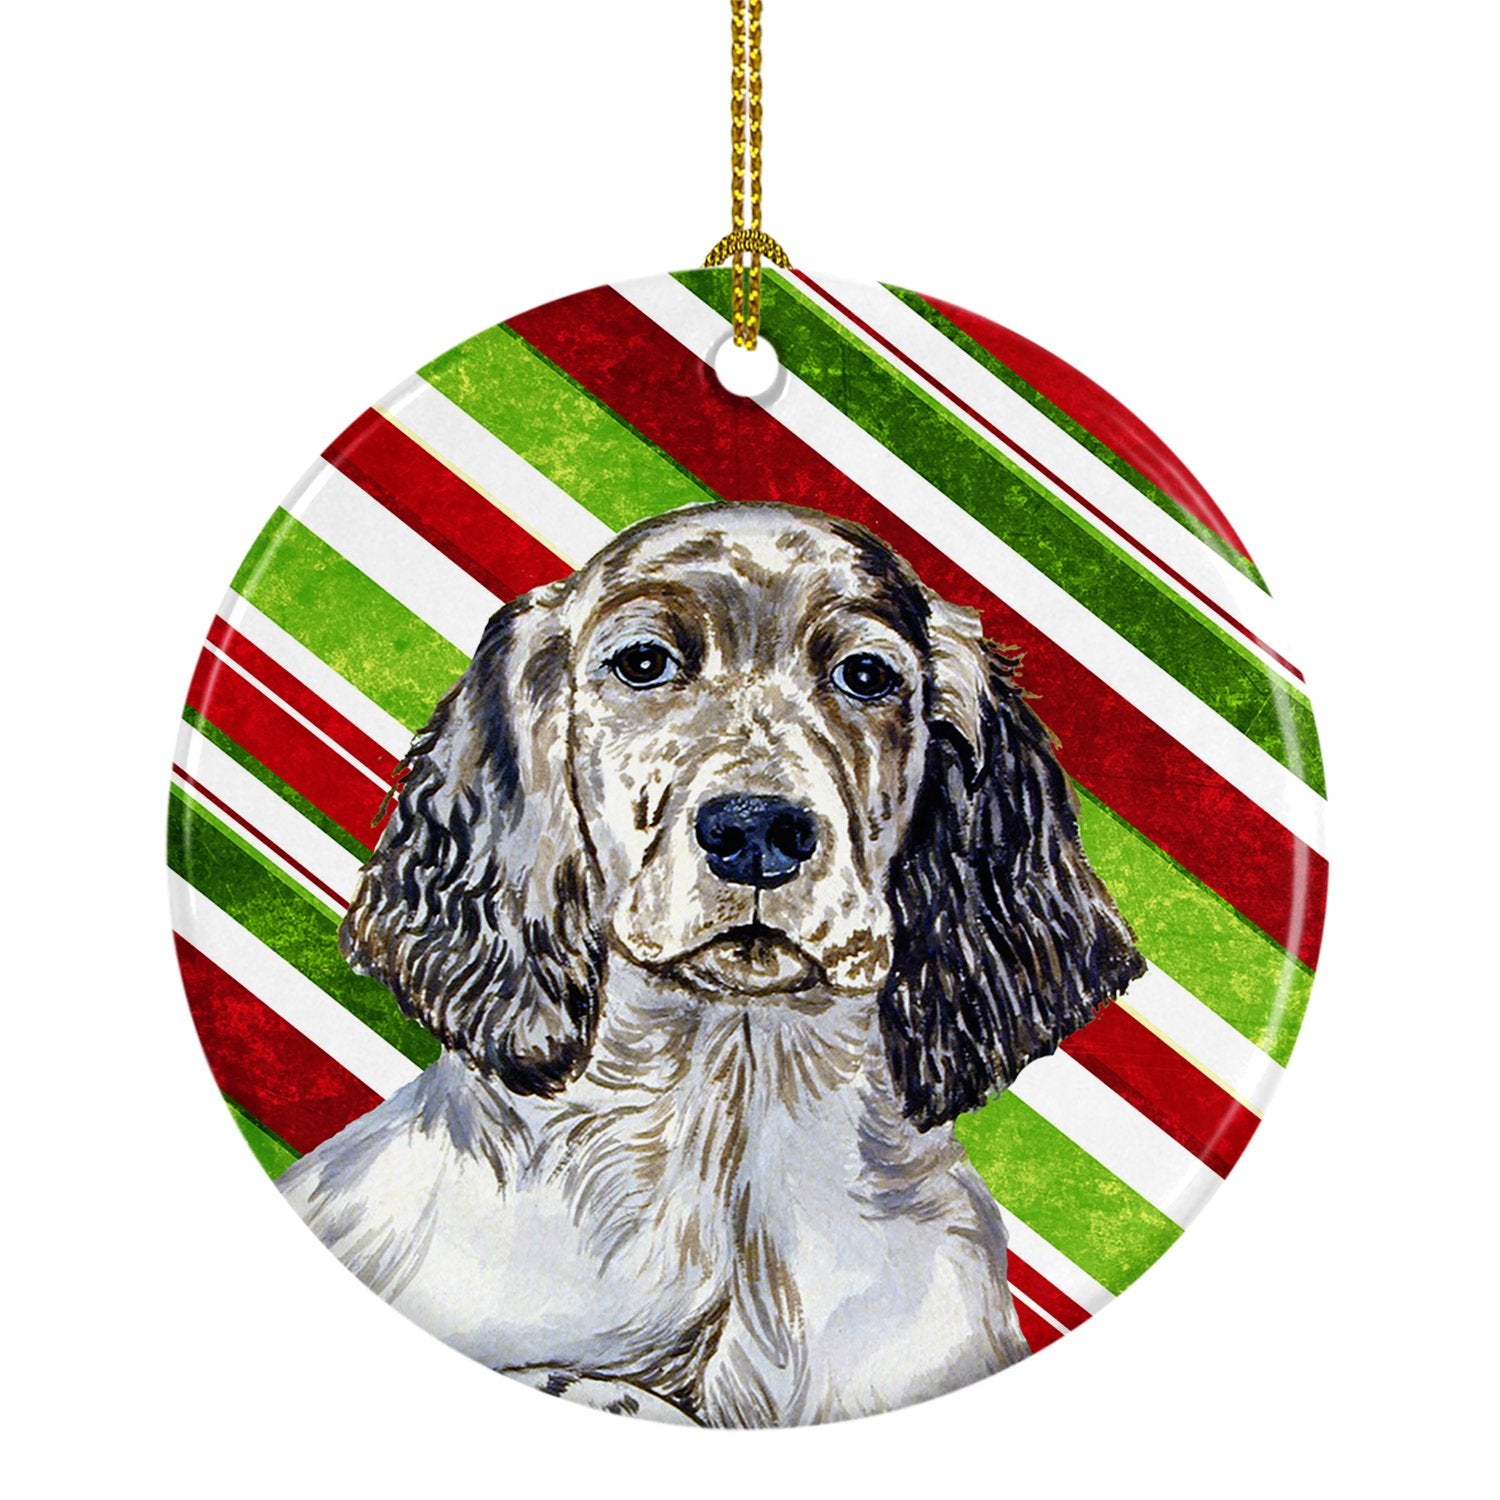 English Setter Candy Cane Holiday Christmas Ceramic Ornament LH9232 by Caroline's Treasures